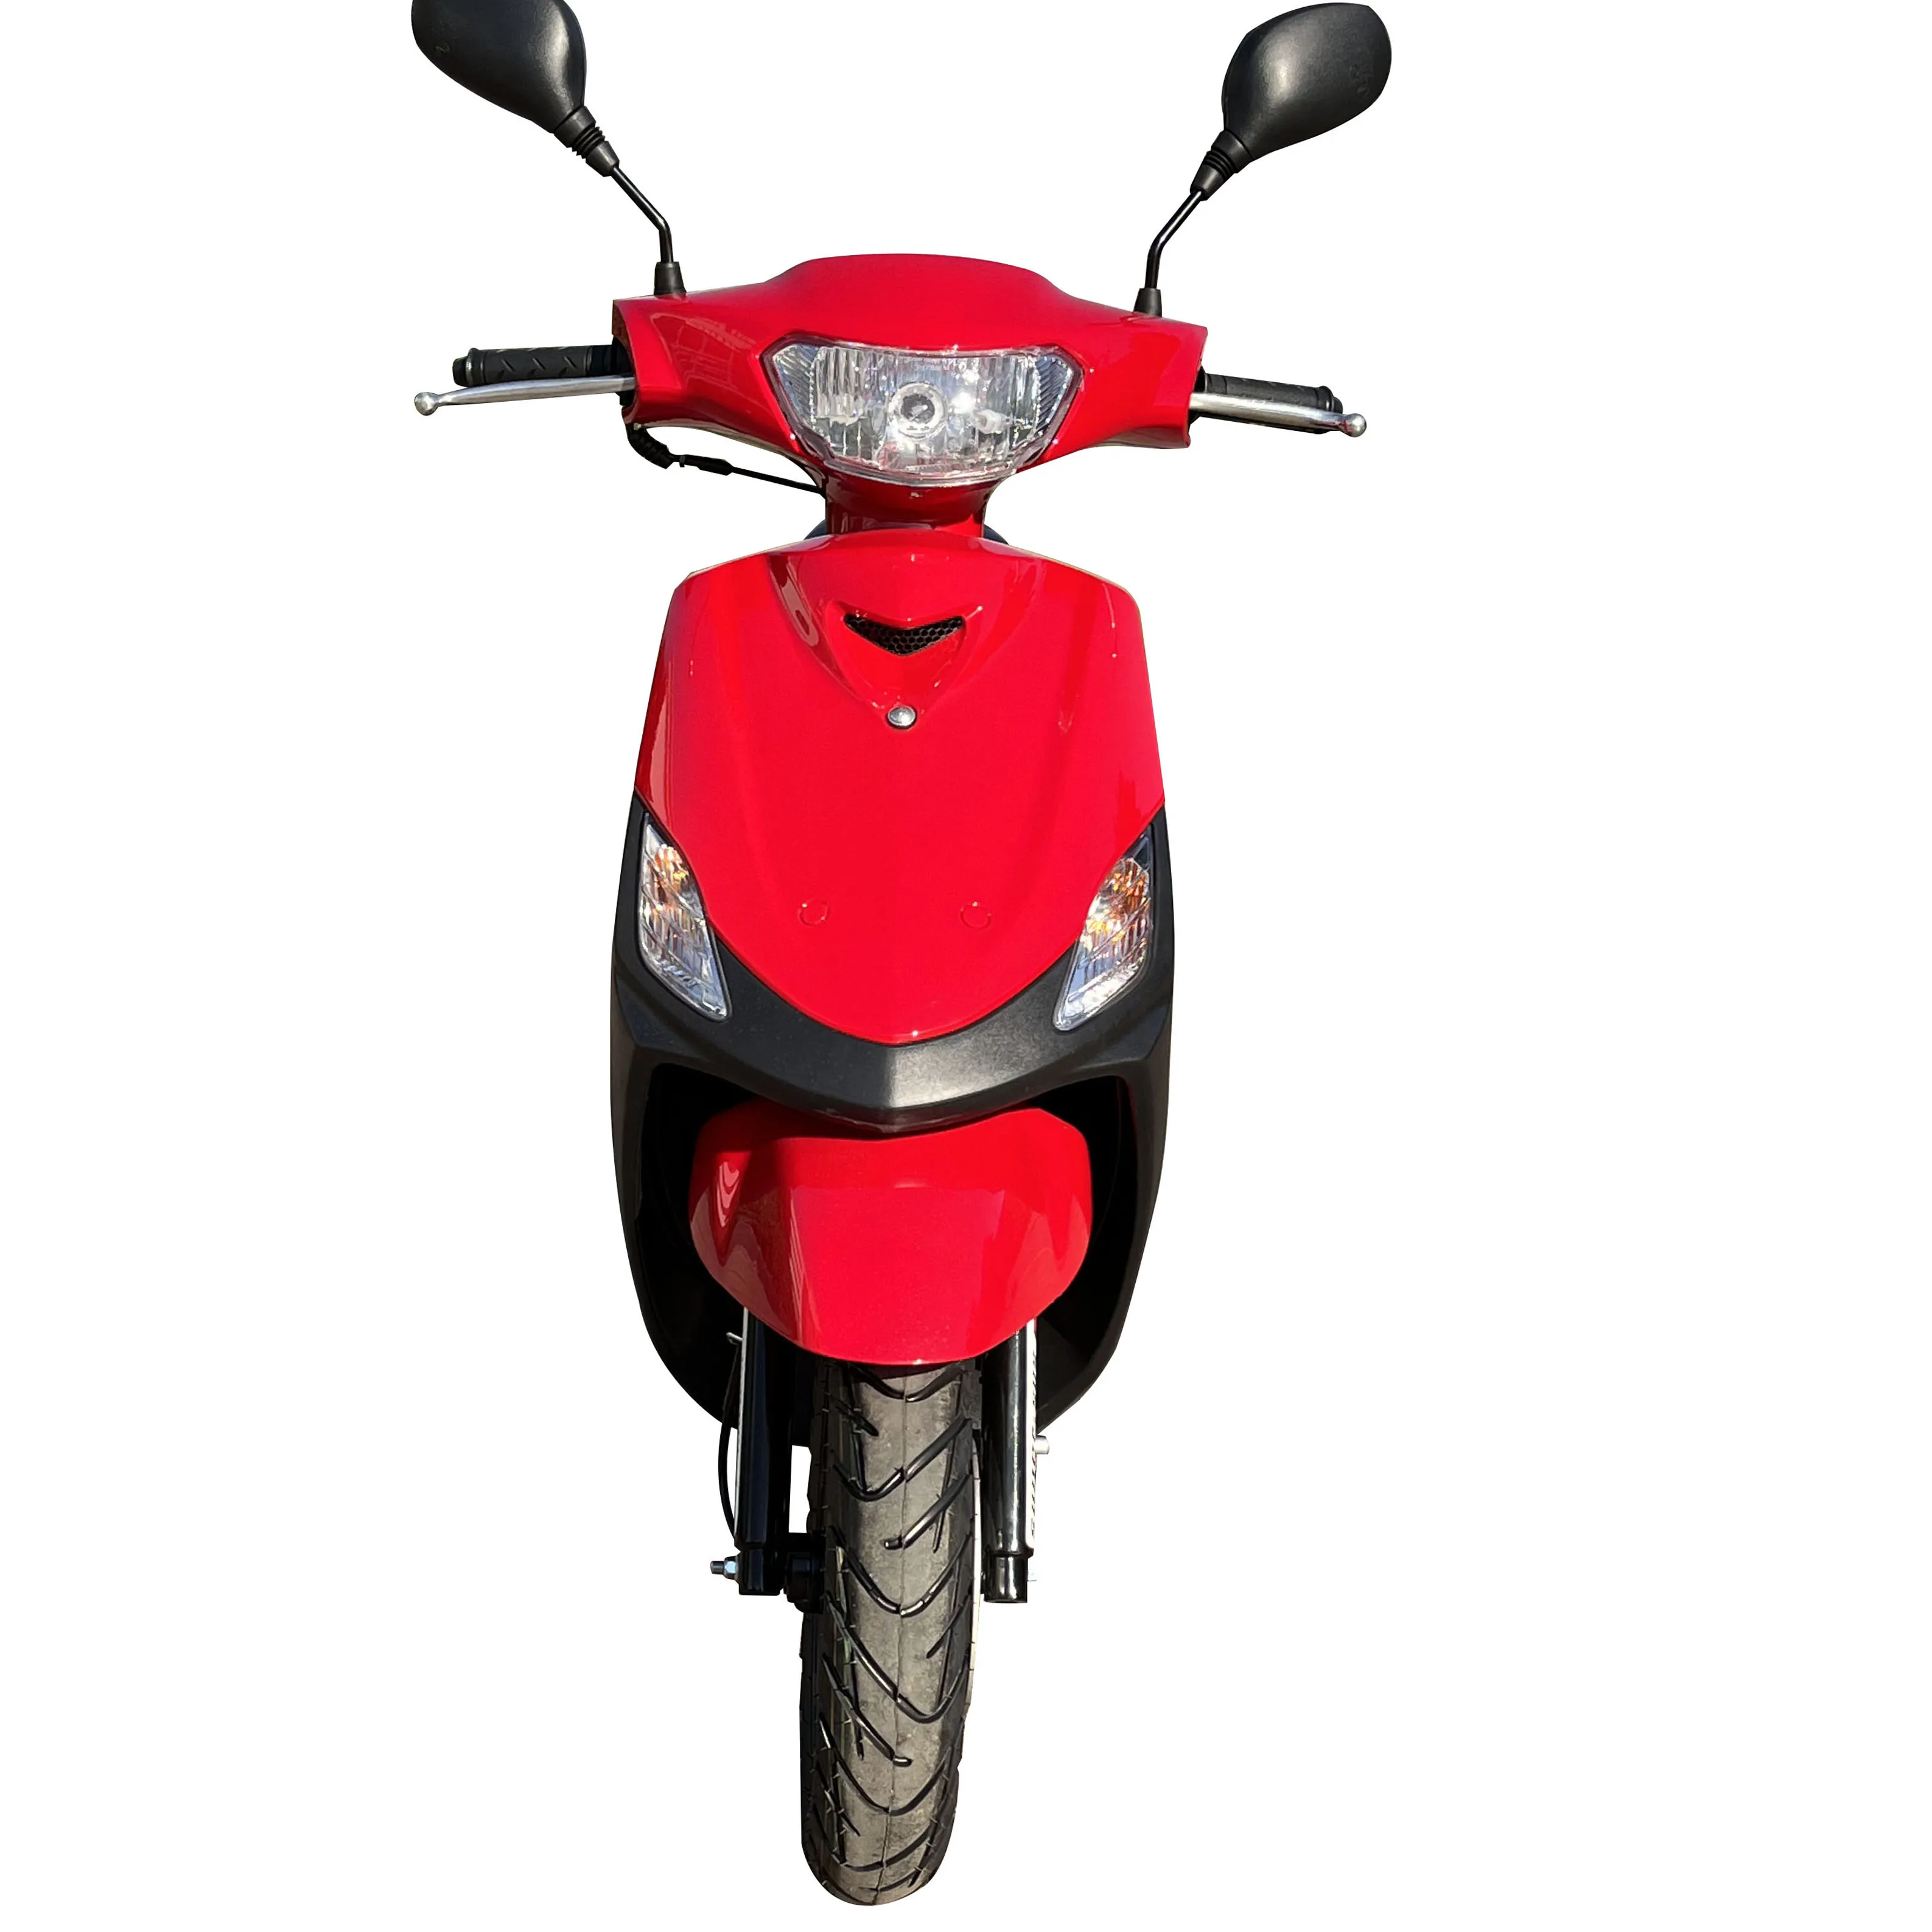 

High Quality Air Cooled Single Cylinder 4-Stroke Engine Gas Motor Scooter 50cc Gasoline Moped Motorcycle Scooter